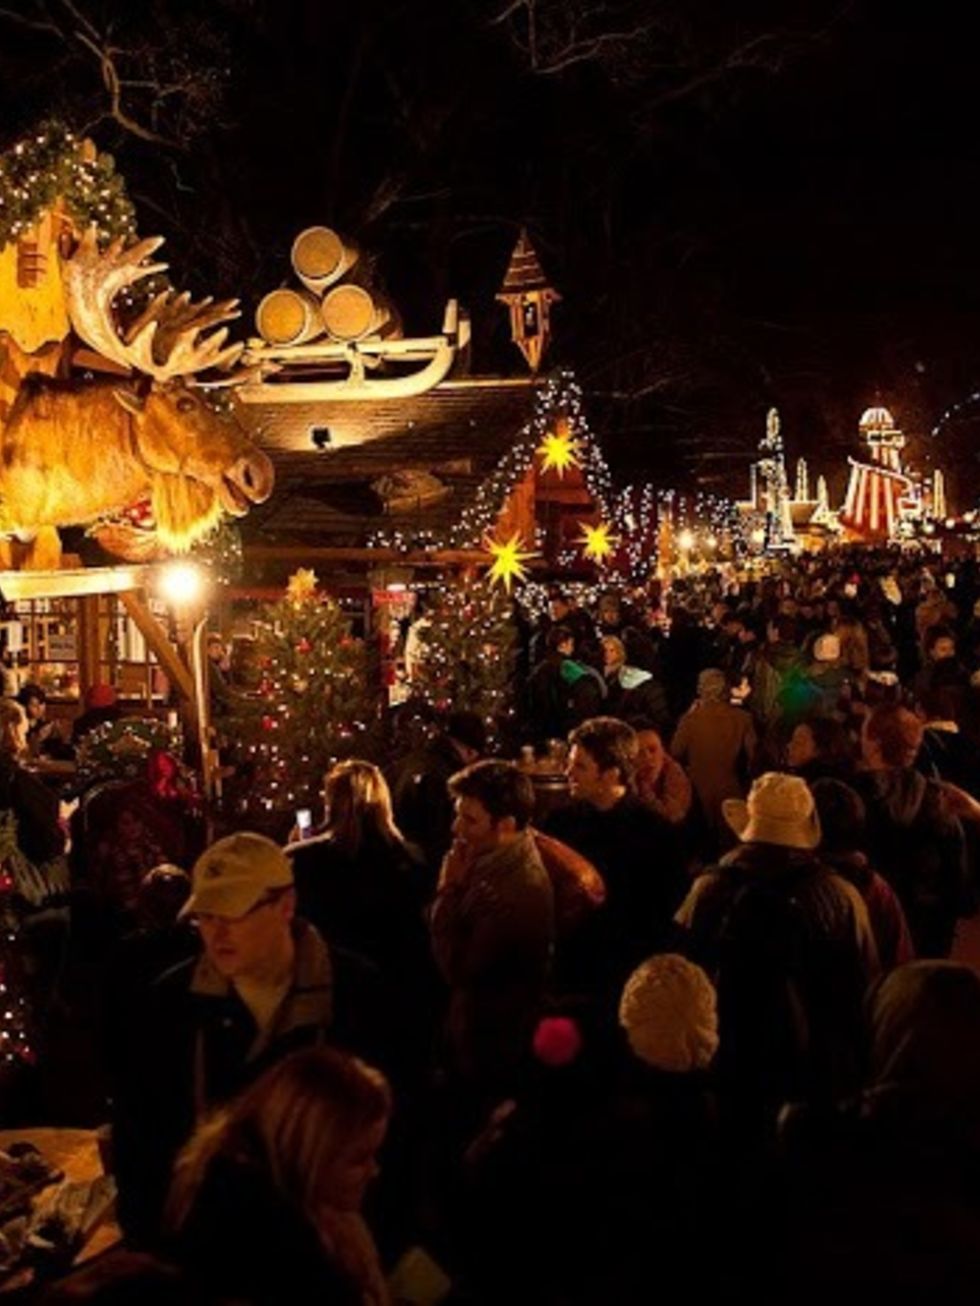 <p>POP-UP: Winter Wonderland </p>

<p>You might not have heard of this small-scale, under-the-radar gathering, but... Nah! We're just kidding. It's the Christmas fair to out-merriment them all, and it's back and bigger than ever. Taking over Hyde Park, th